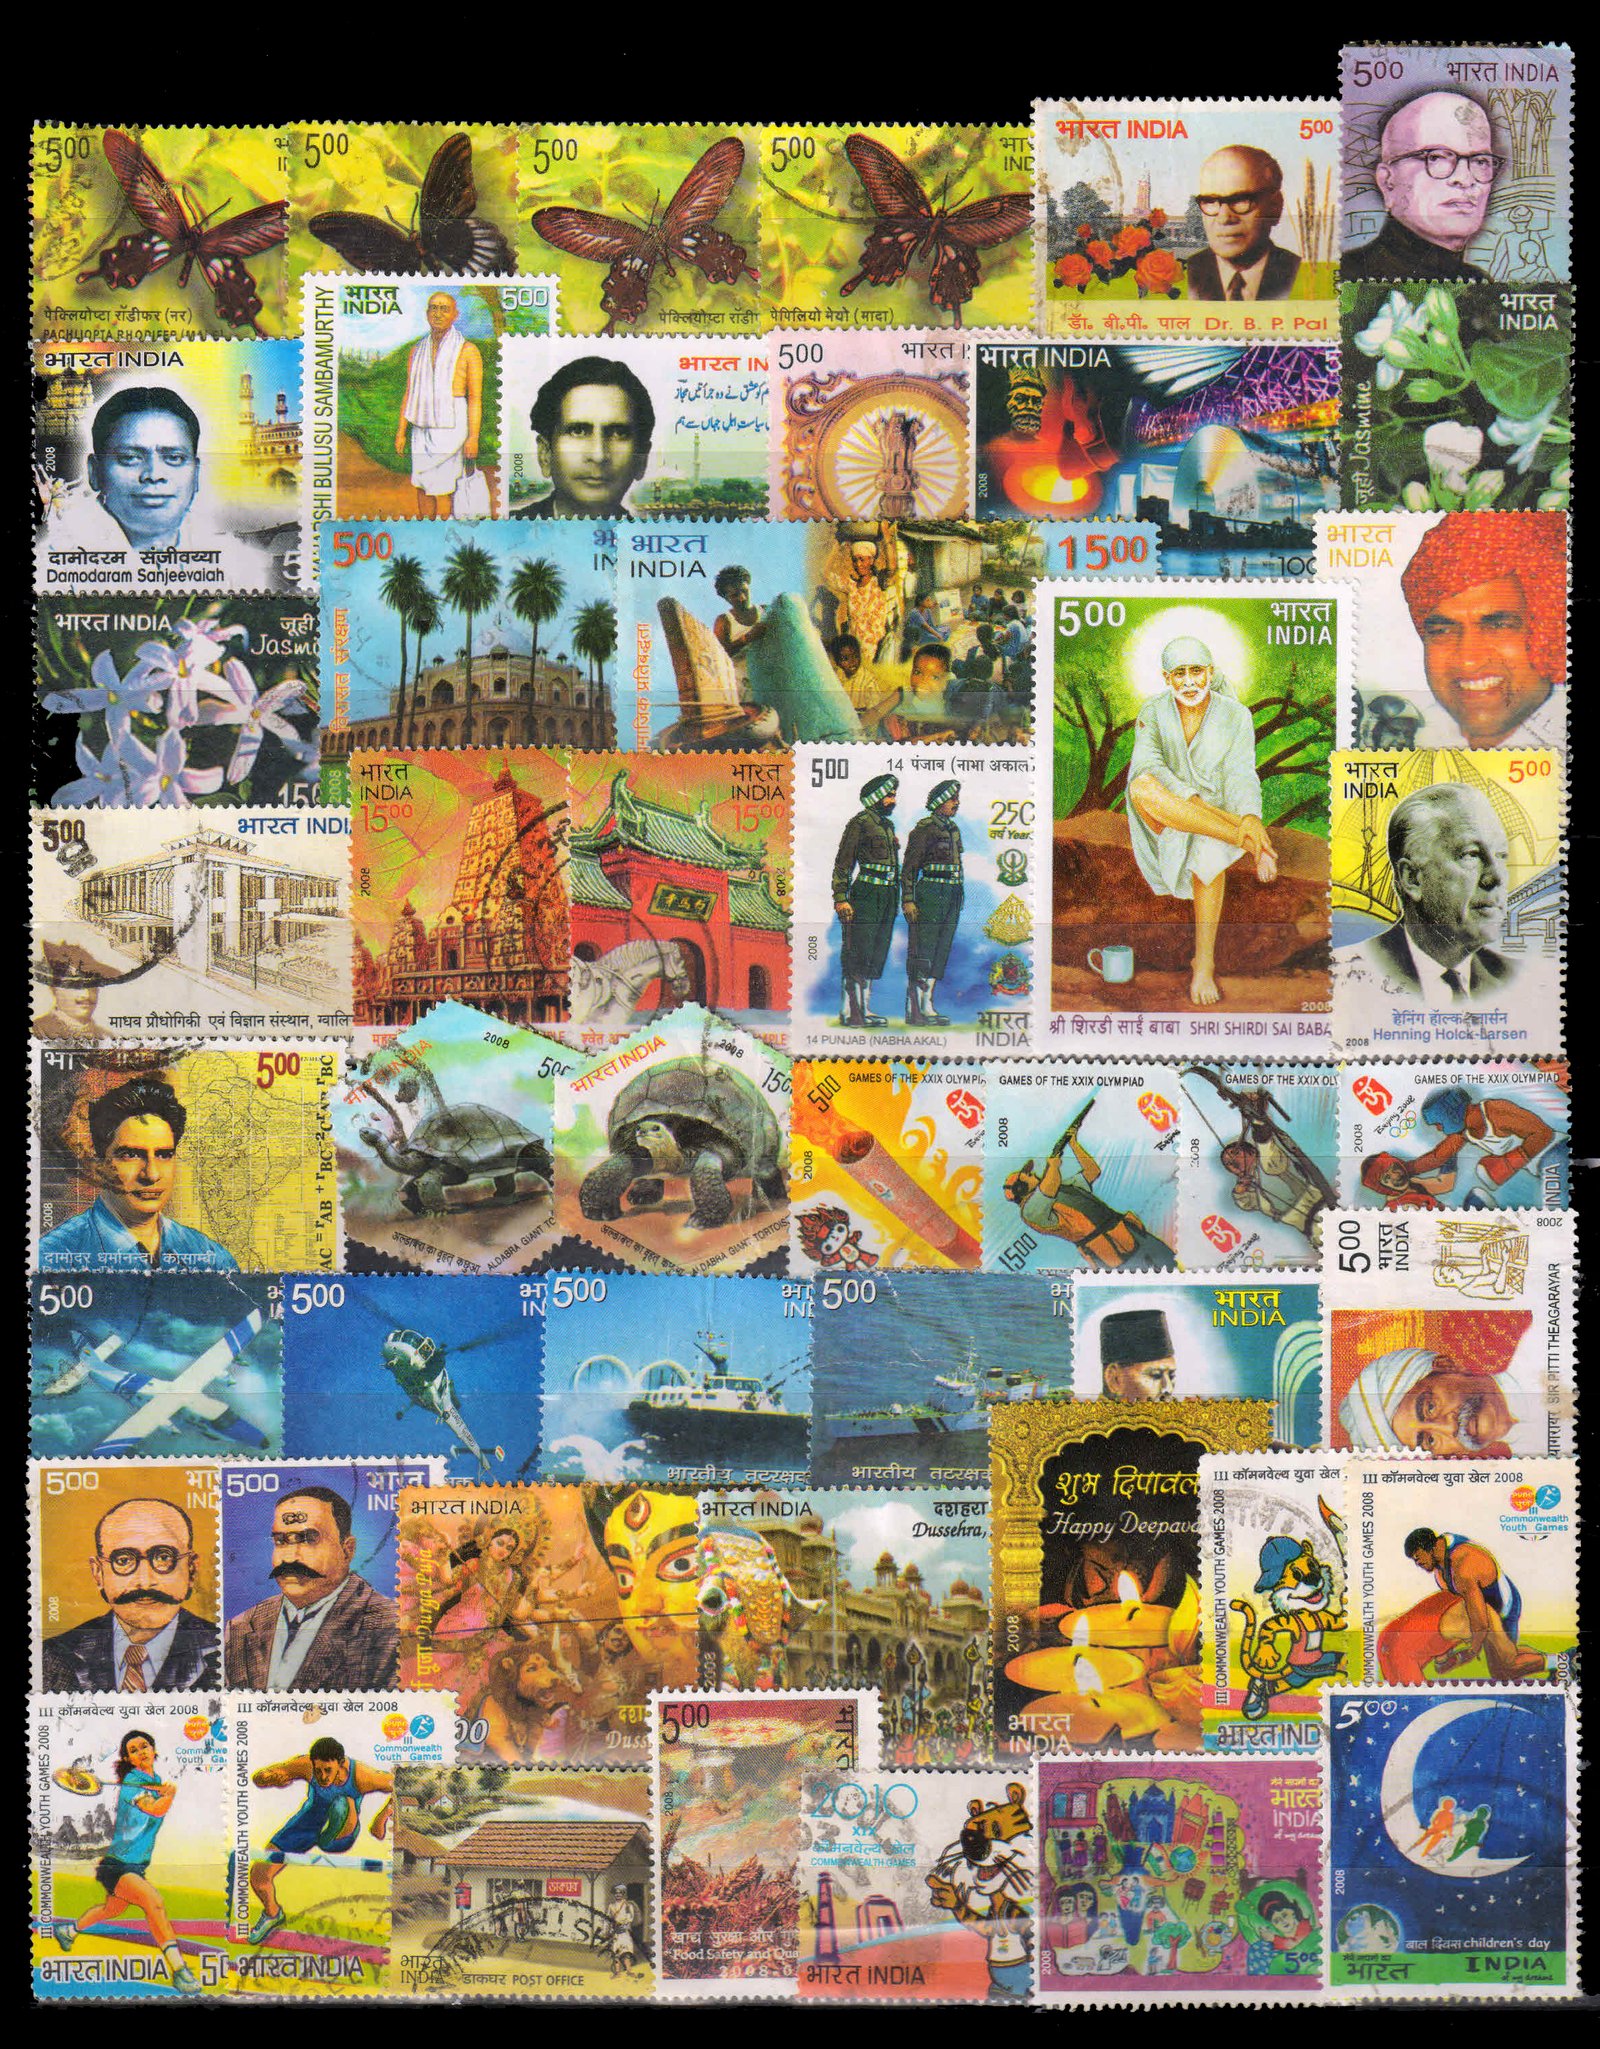 INDIA YEAR UNIT 2008 -72 Used Stamps (Total Issued 79 Stamps)